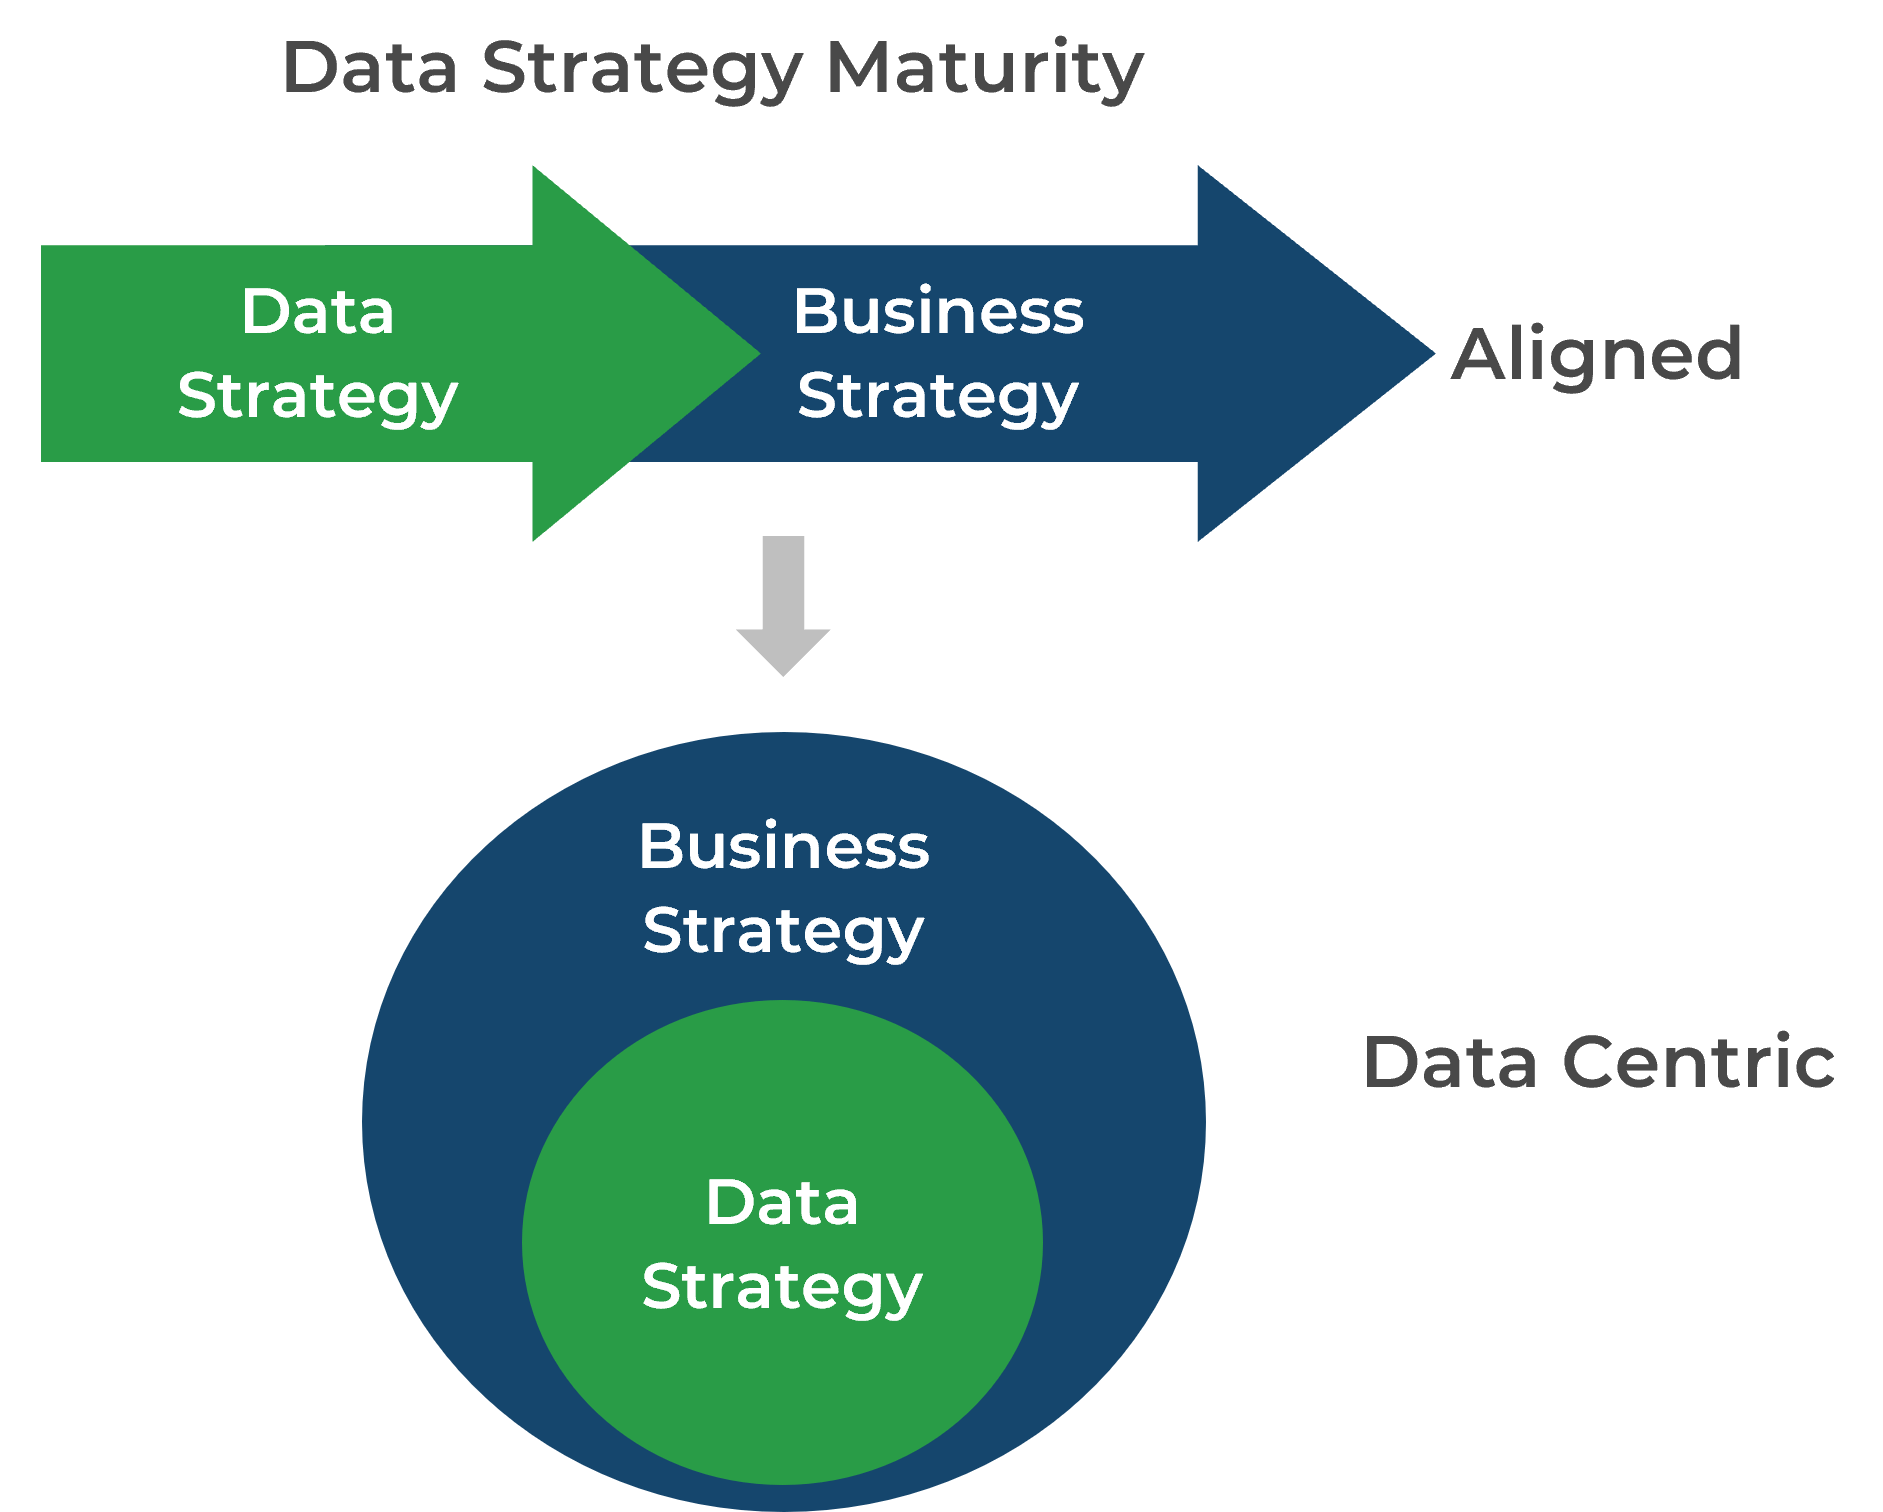 Diagram of 'Data Strategy Maturity' with two arrangements of 'Data Strategy' and 'Business Strategy'. One is 'Aligned', the other is 'Data Centric.'